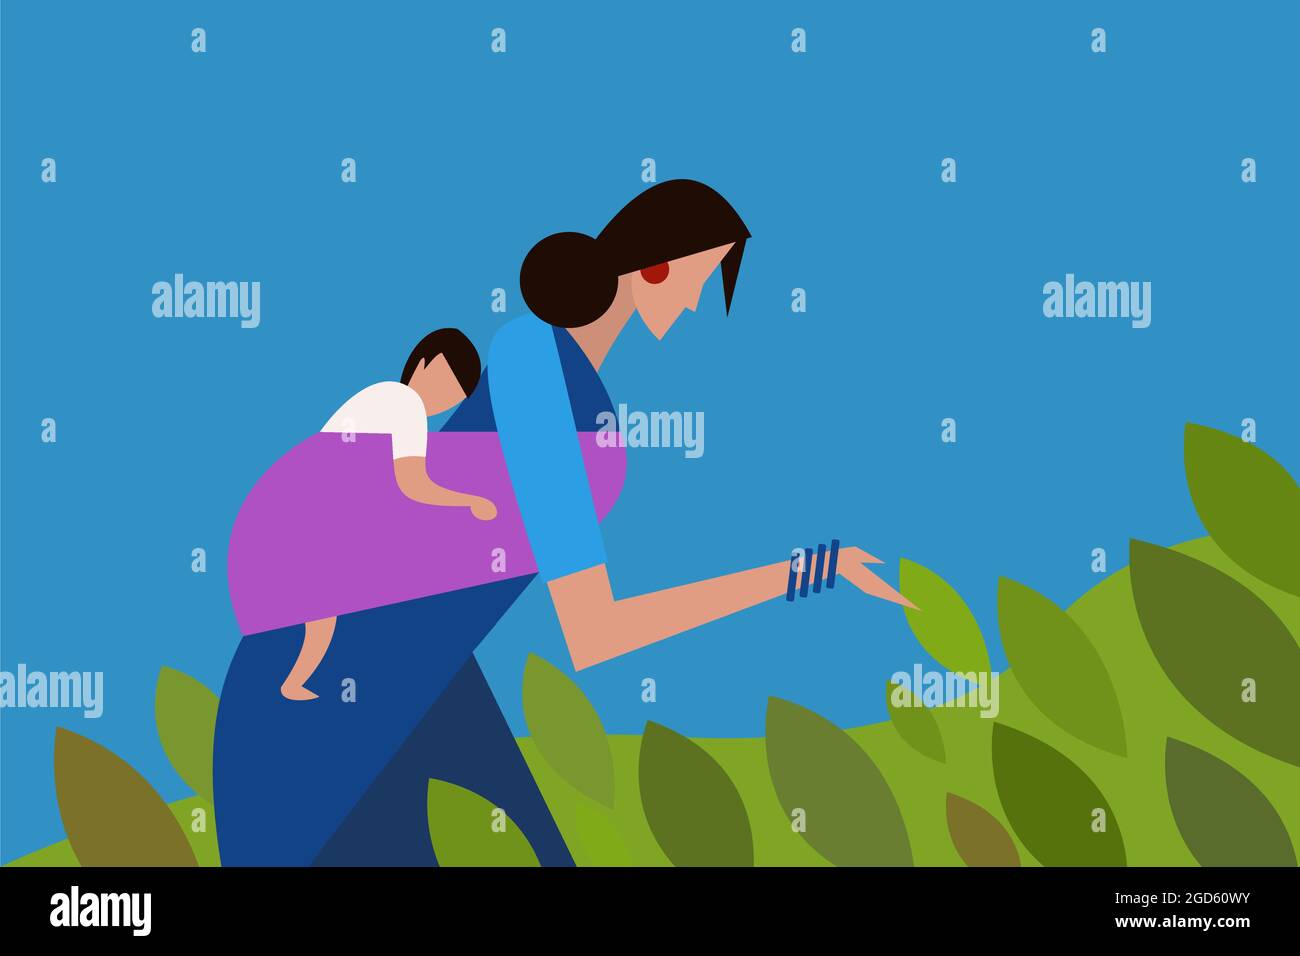 A woman carrying a baby on her back working in a farm Stock Vector